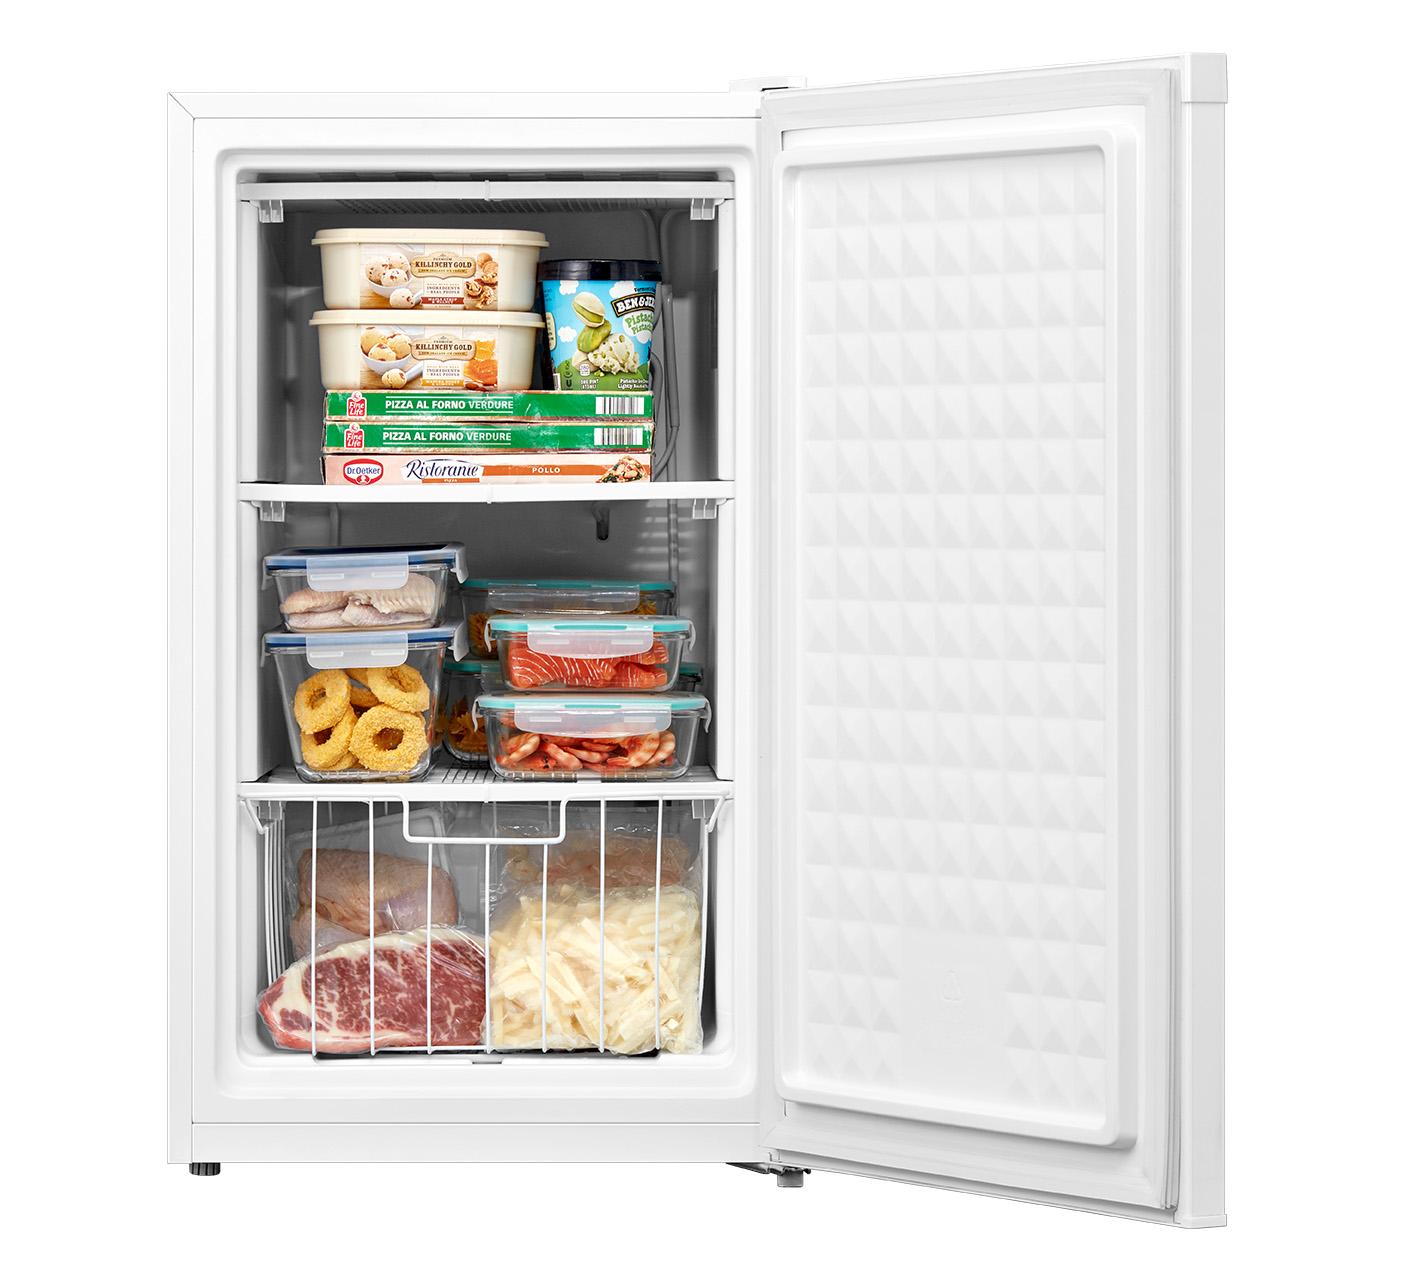 Arctic King 3ft Upright Freezer for $145 Shipped